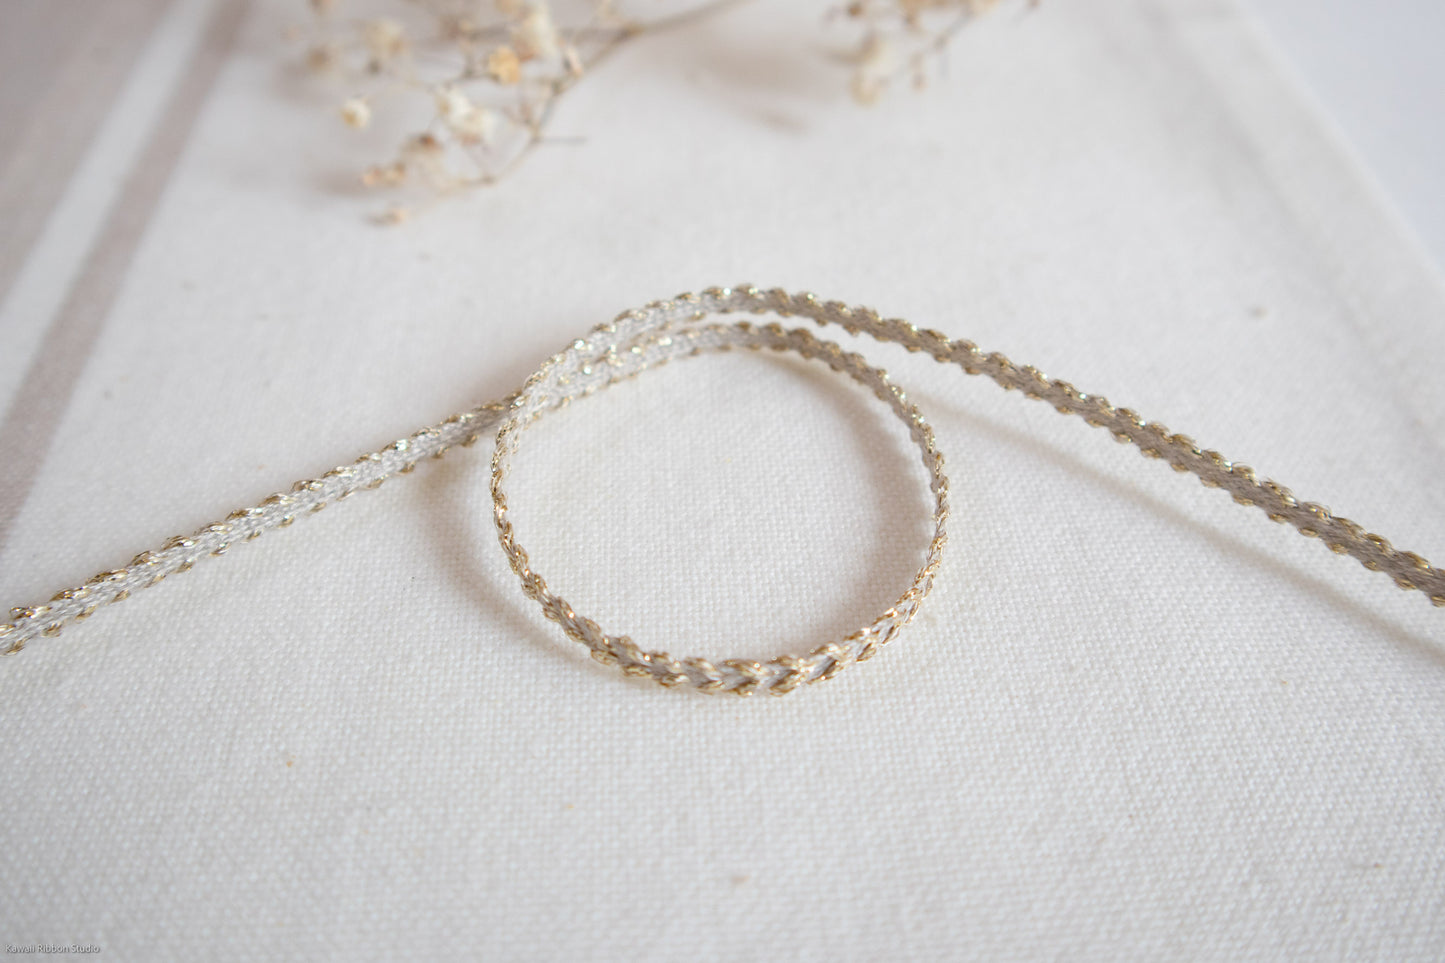 4mm Natural gold metallic jewelry cord in washed linen